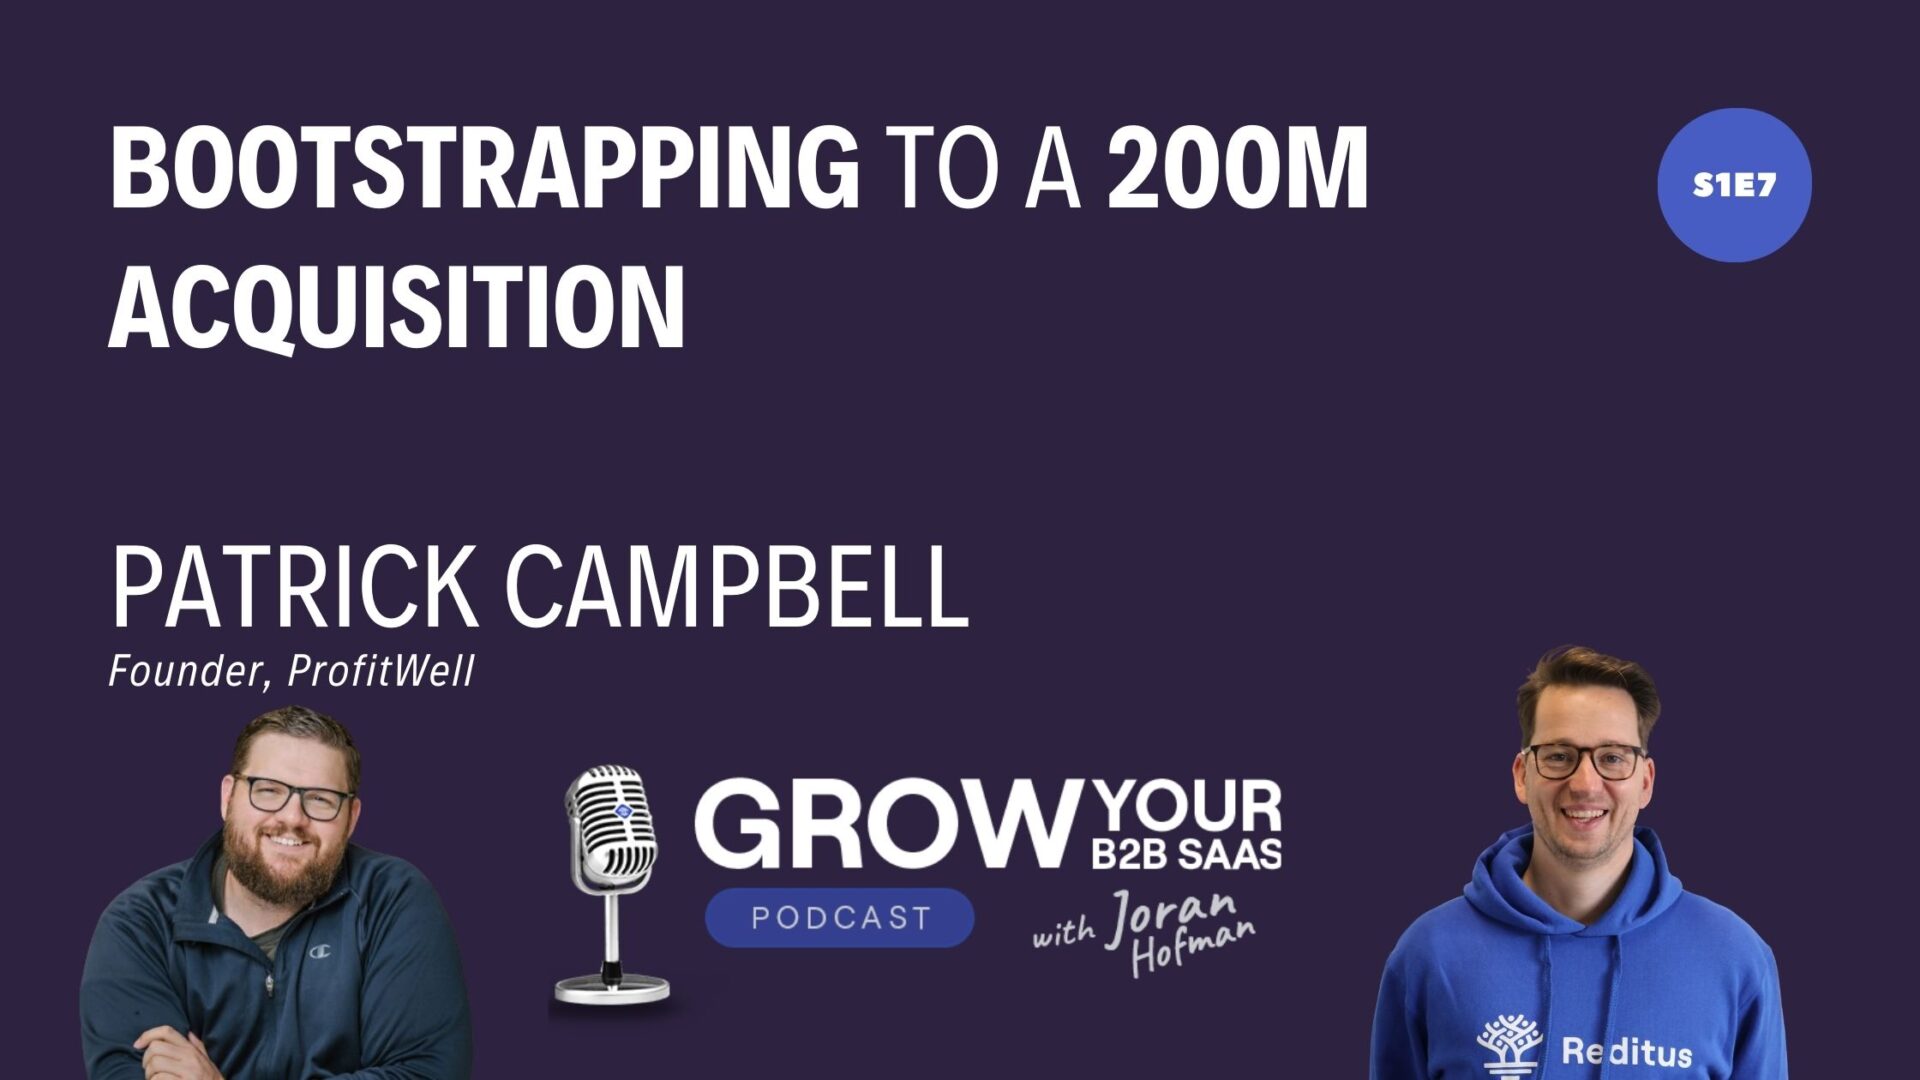 https://www.getreditus.com/podcast/s1e7-bootstrapping-to-a-200m-acquisition-with-patrick-campbell/